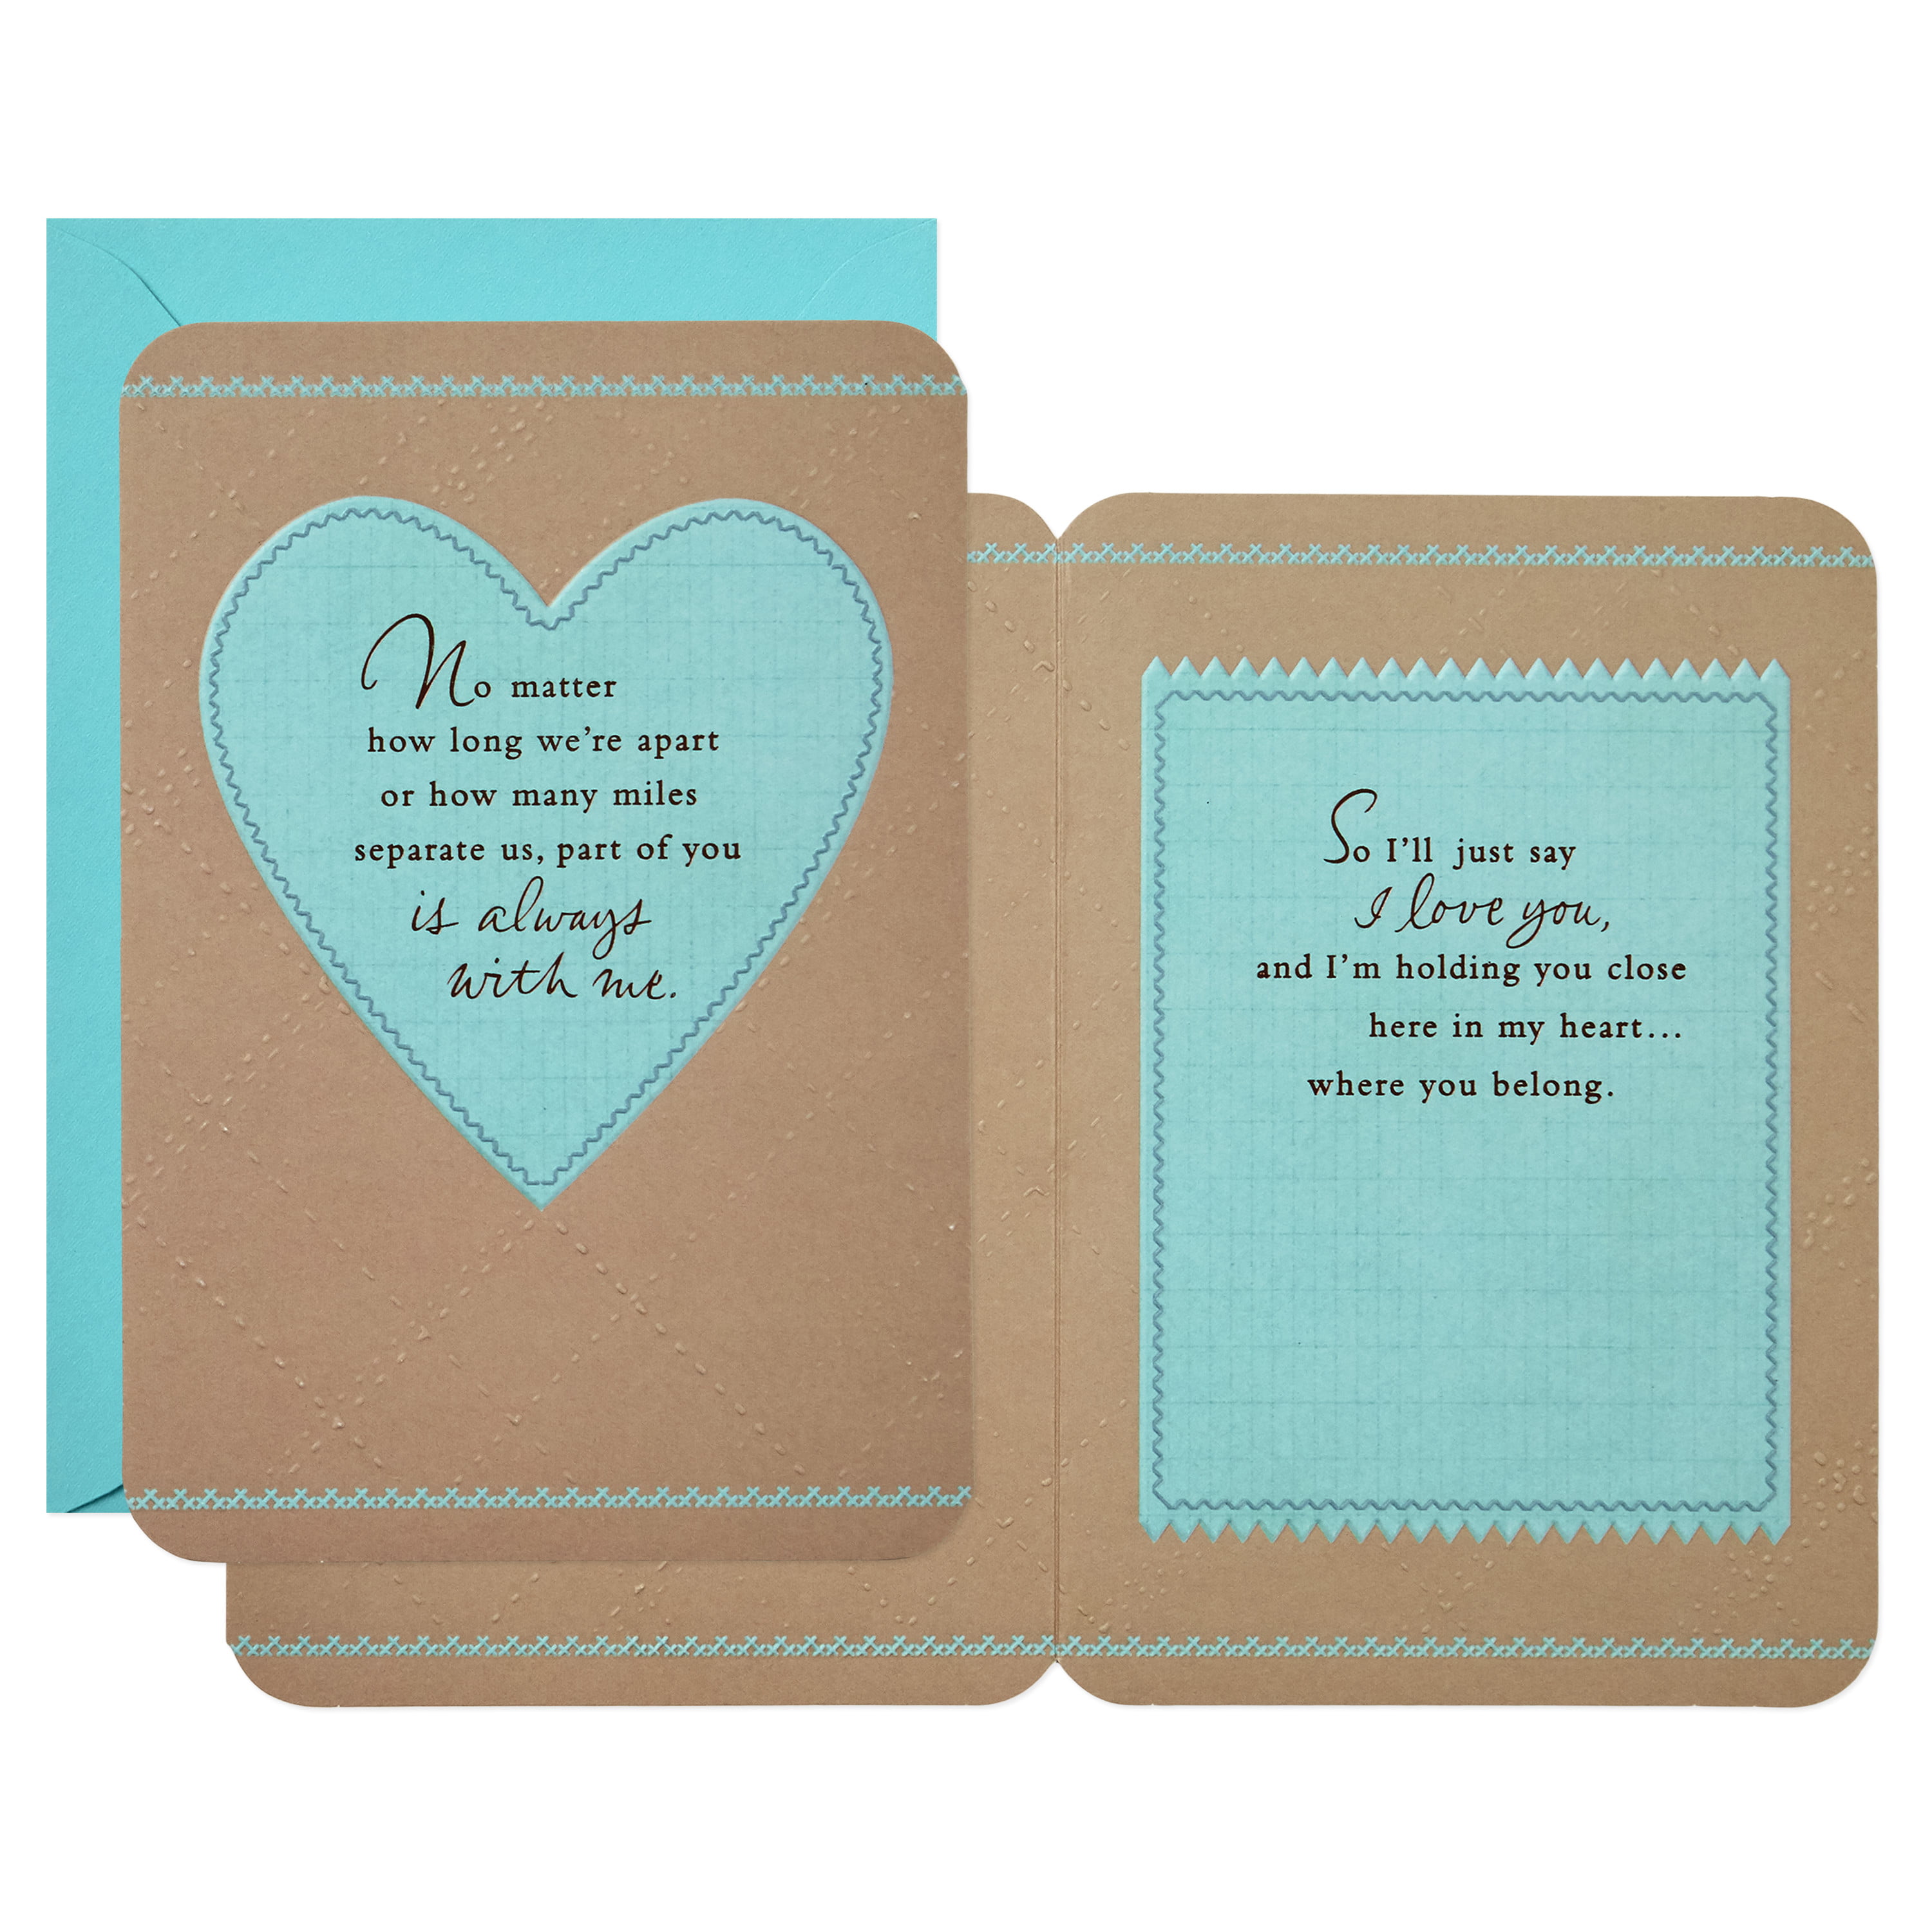 Details about   Love & Romance The Easy Way About Us When Are Together Hallmark Greeting Card 